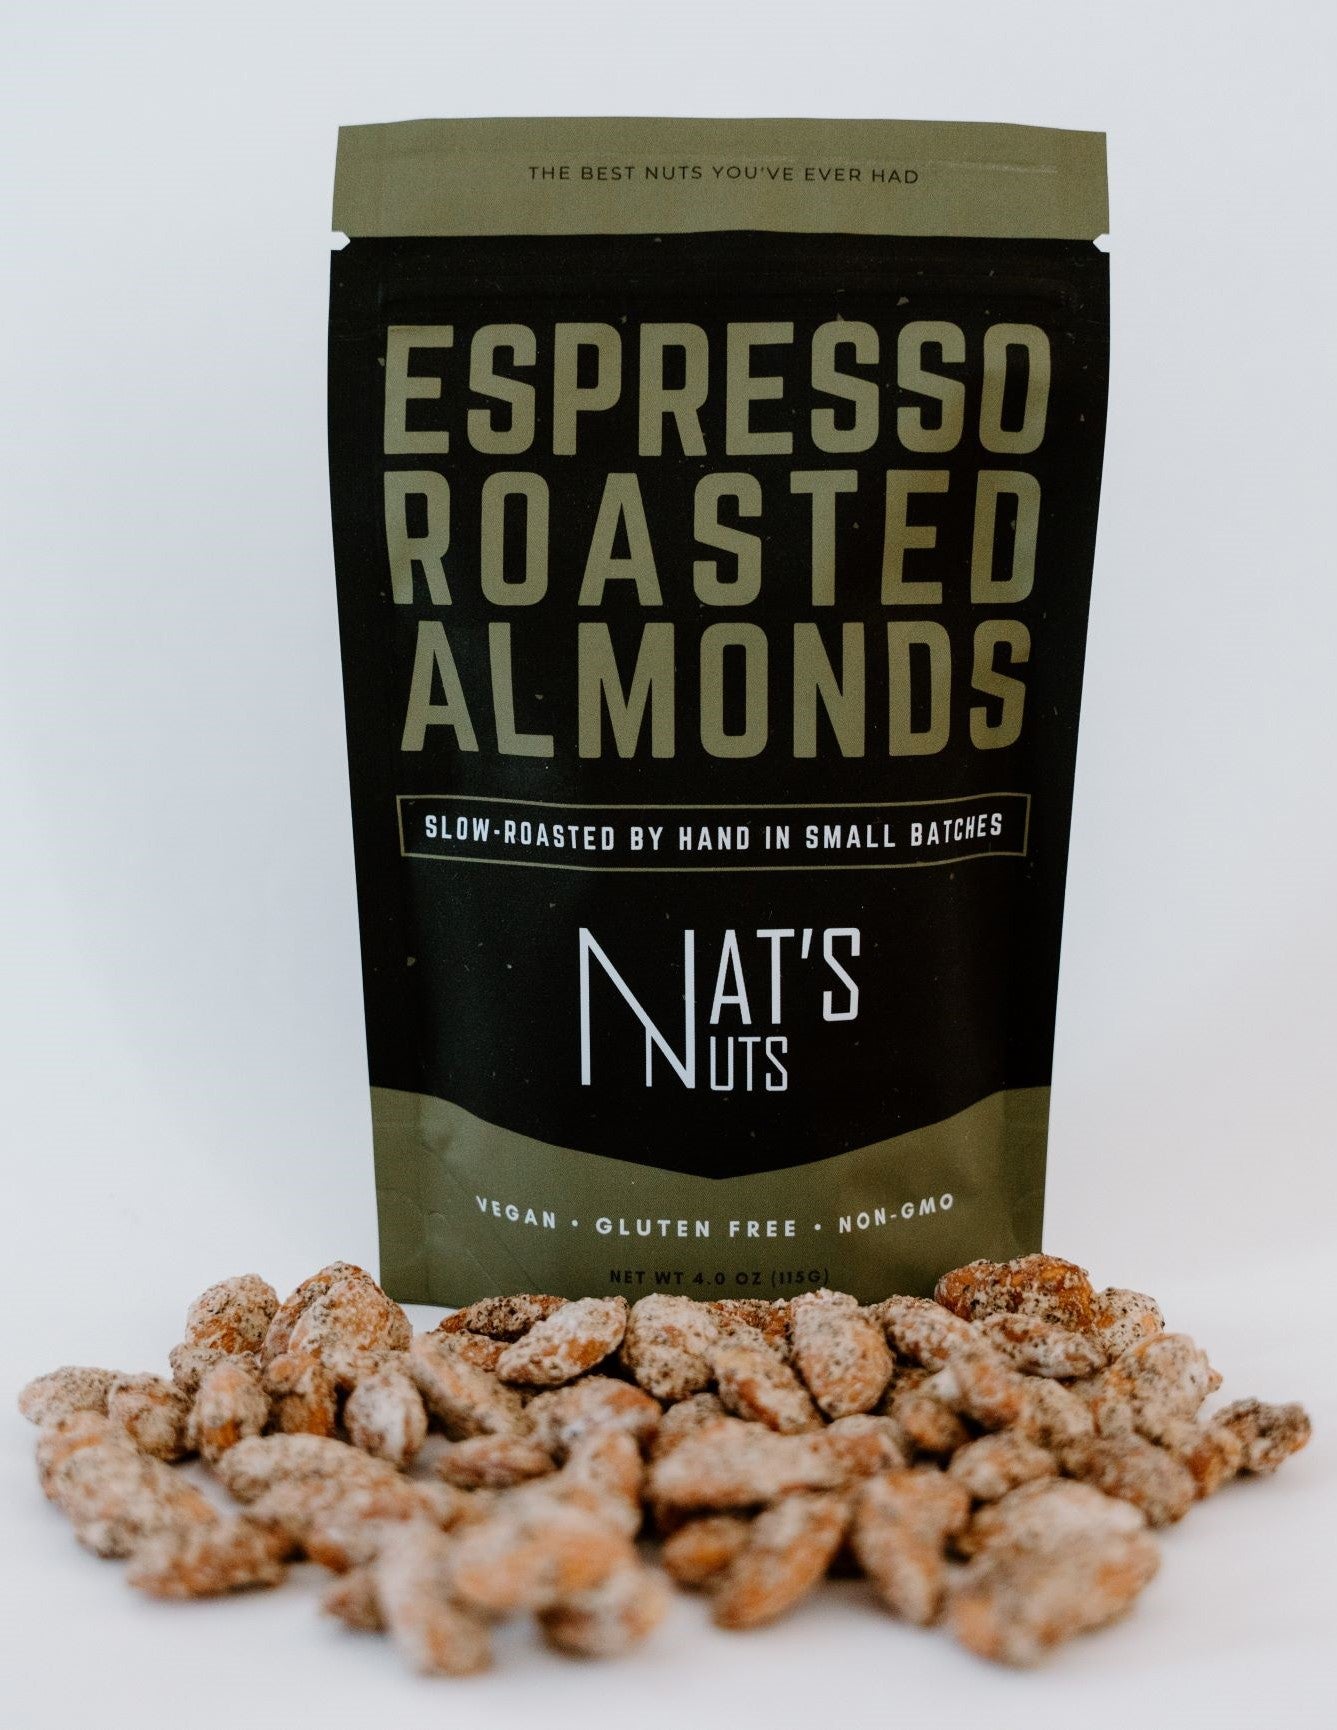 Espresso Roasted Almonds by Nat's Nuts